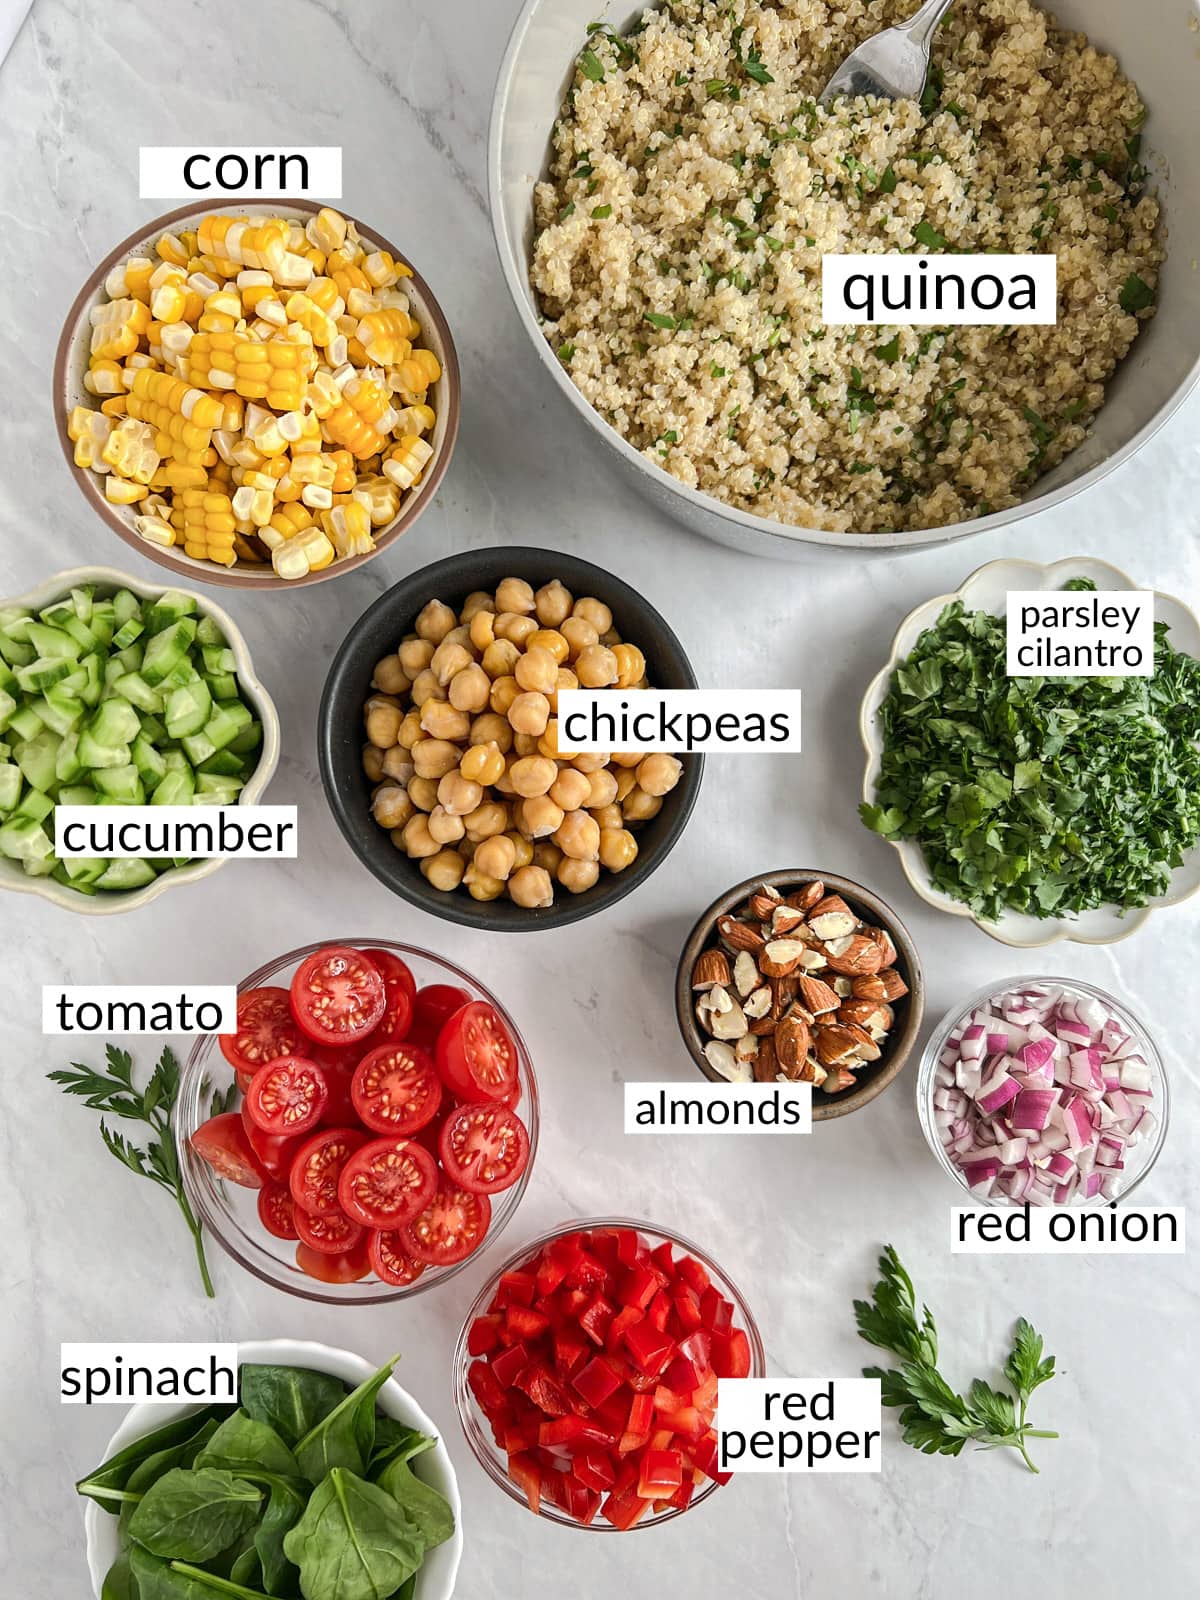 Ingredients for veggie packed quinoa salad set out in individual containers on the counter.